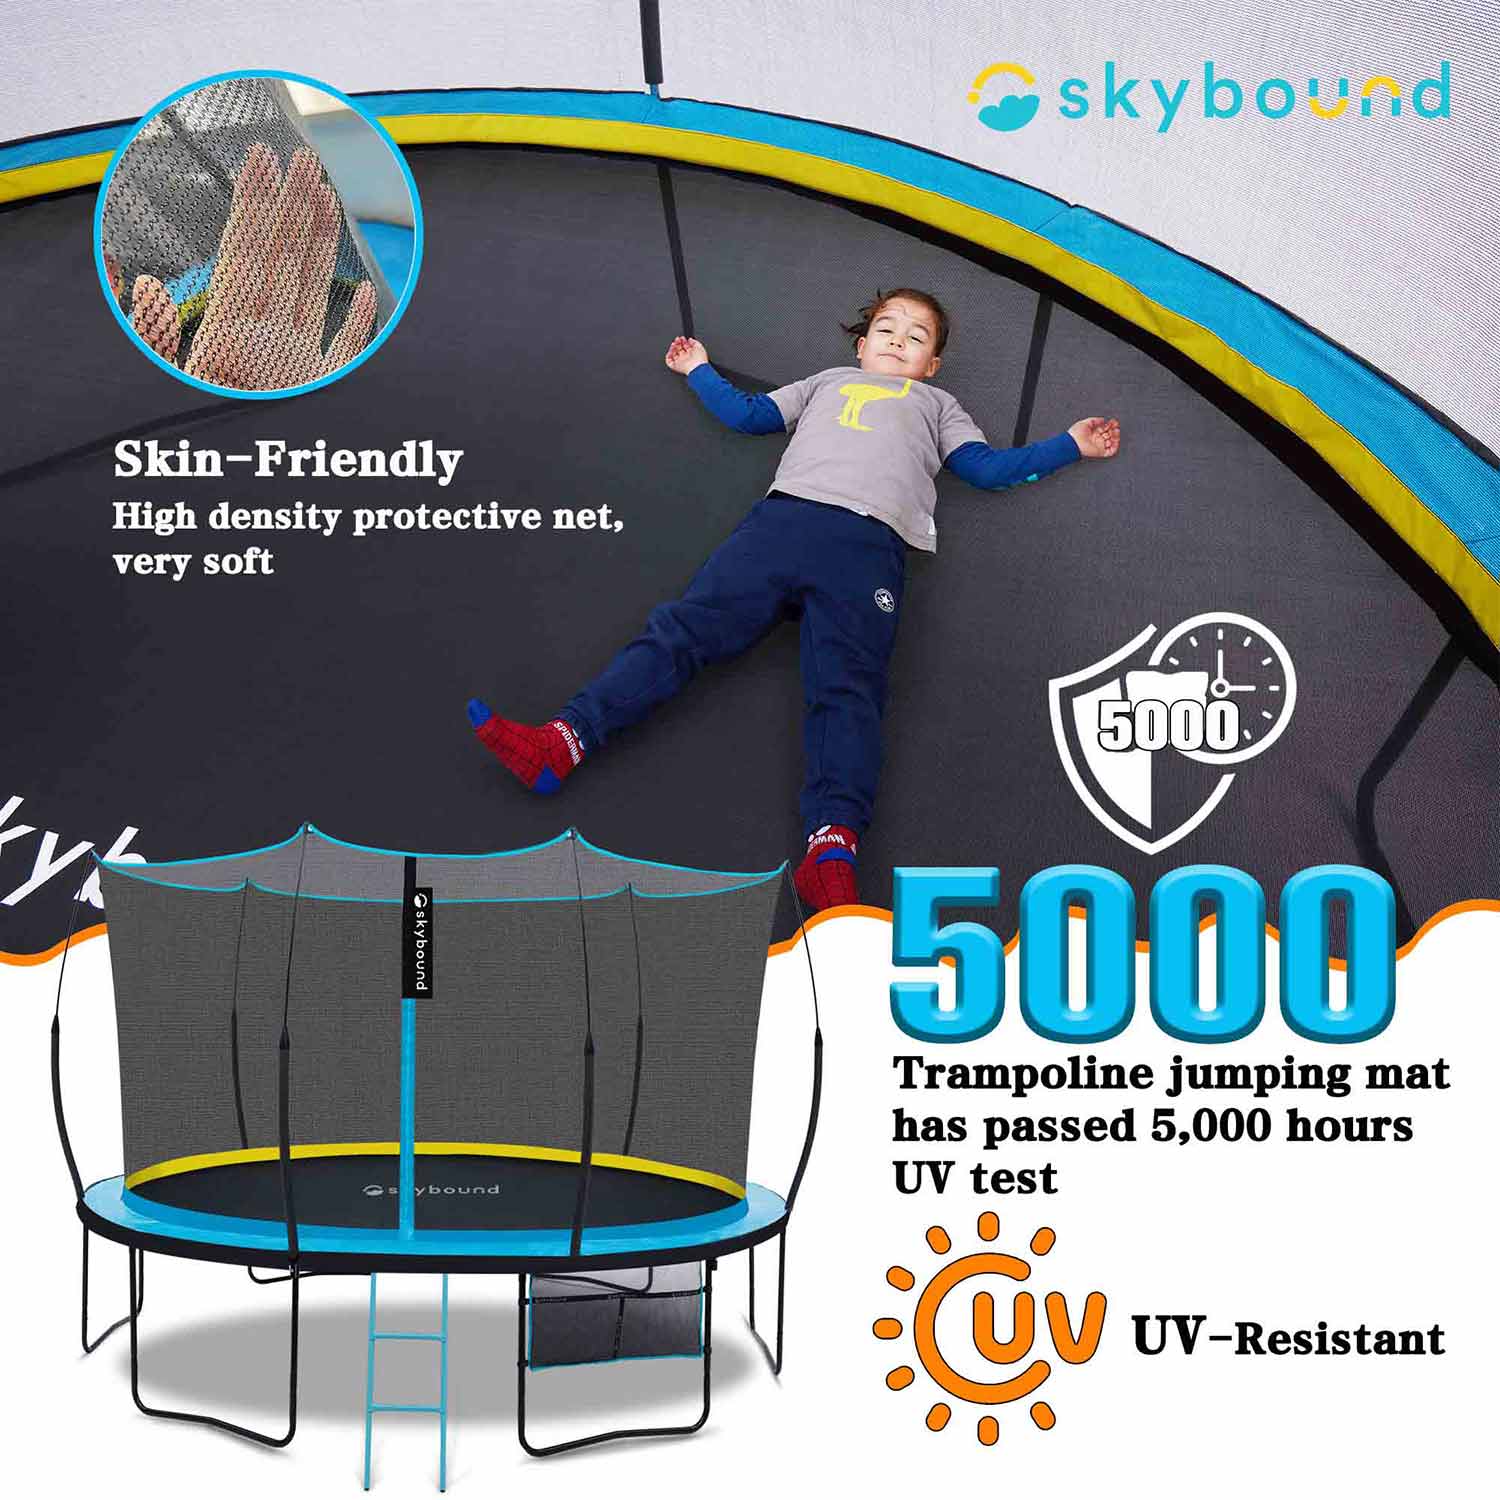 At the top, a little girl is lying on an 6ft trampoline, with a detailed image of the net in the top left corner. Below it reads "Skin-friendly high-quality softness." Beneath, next to the trampoline, it says "5000 UV tested, UV resistant."